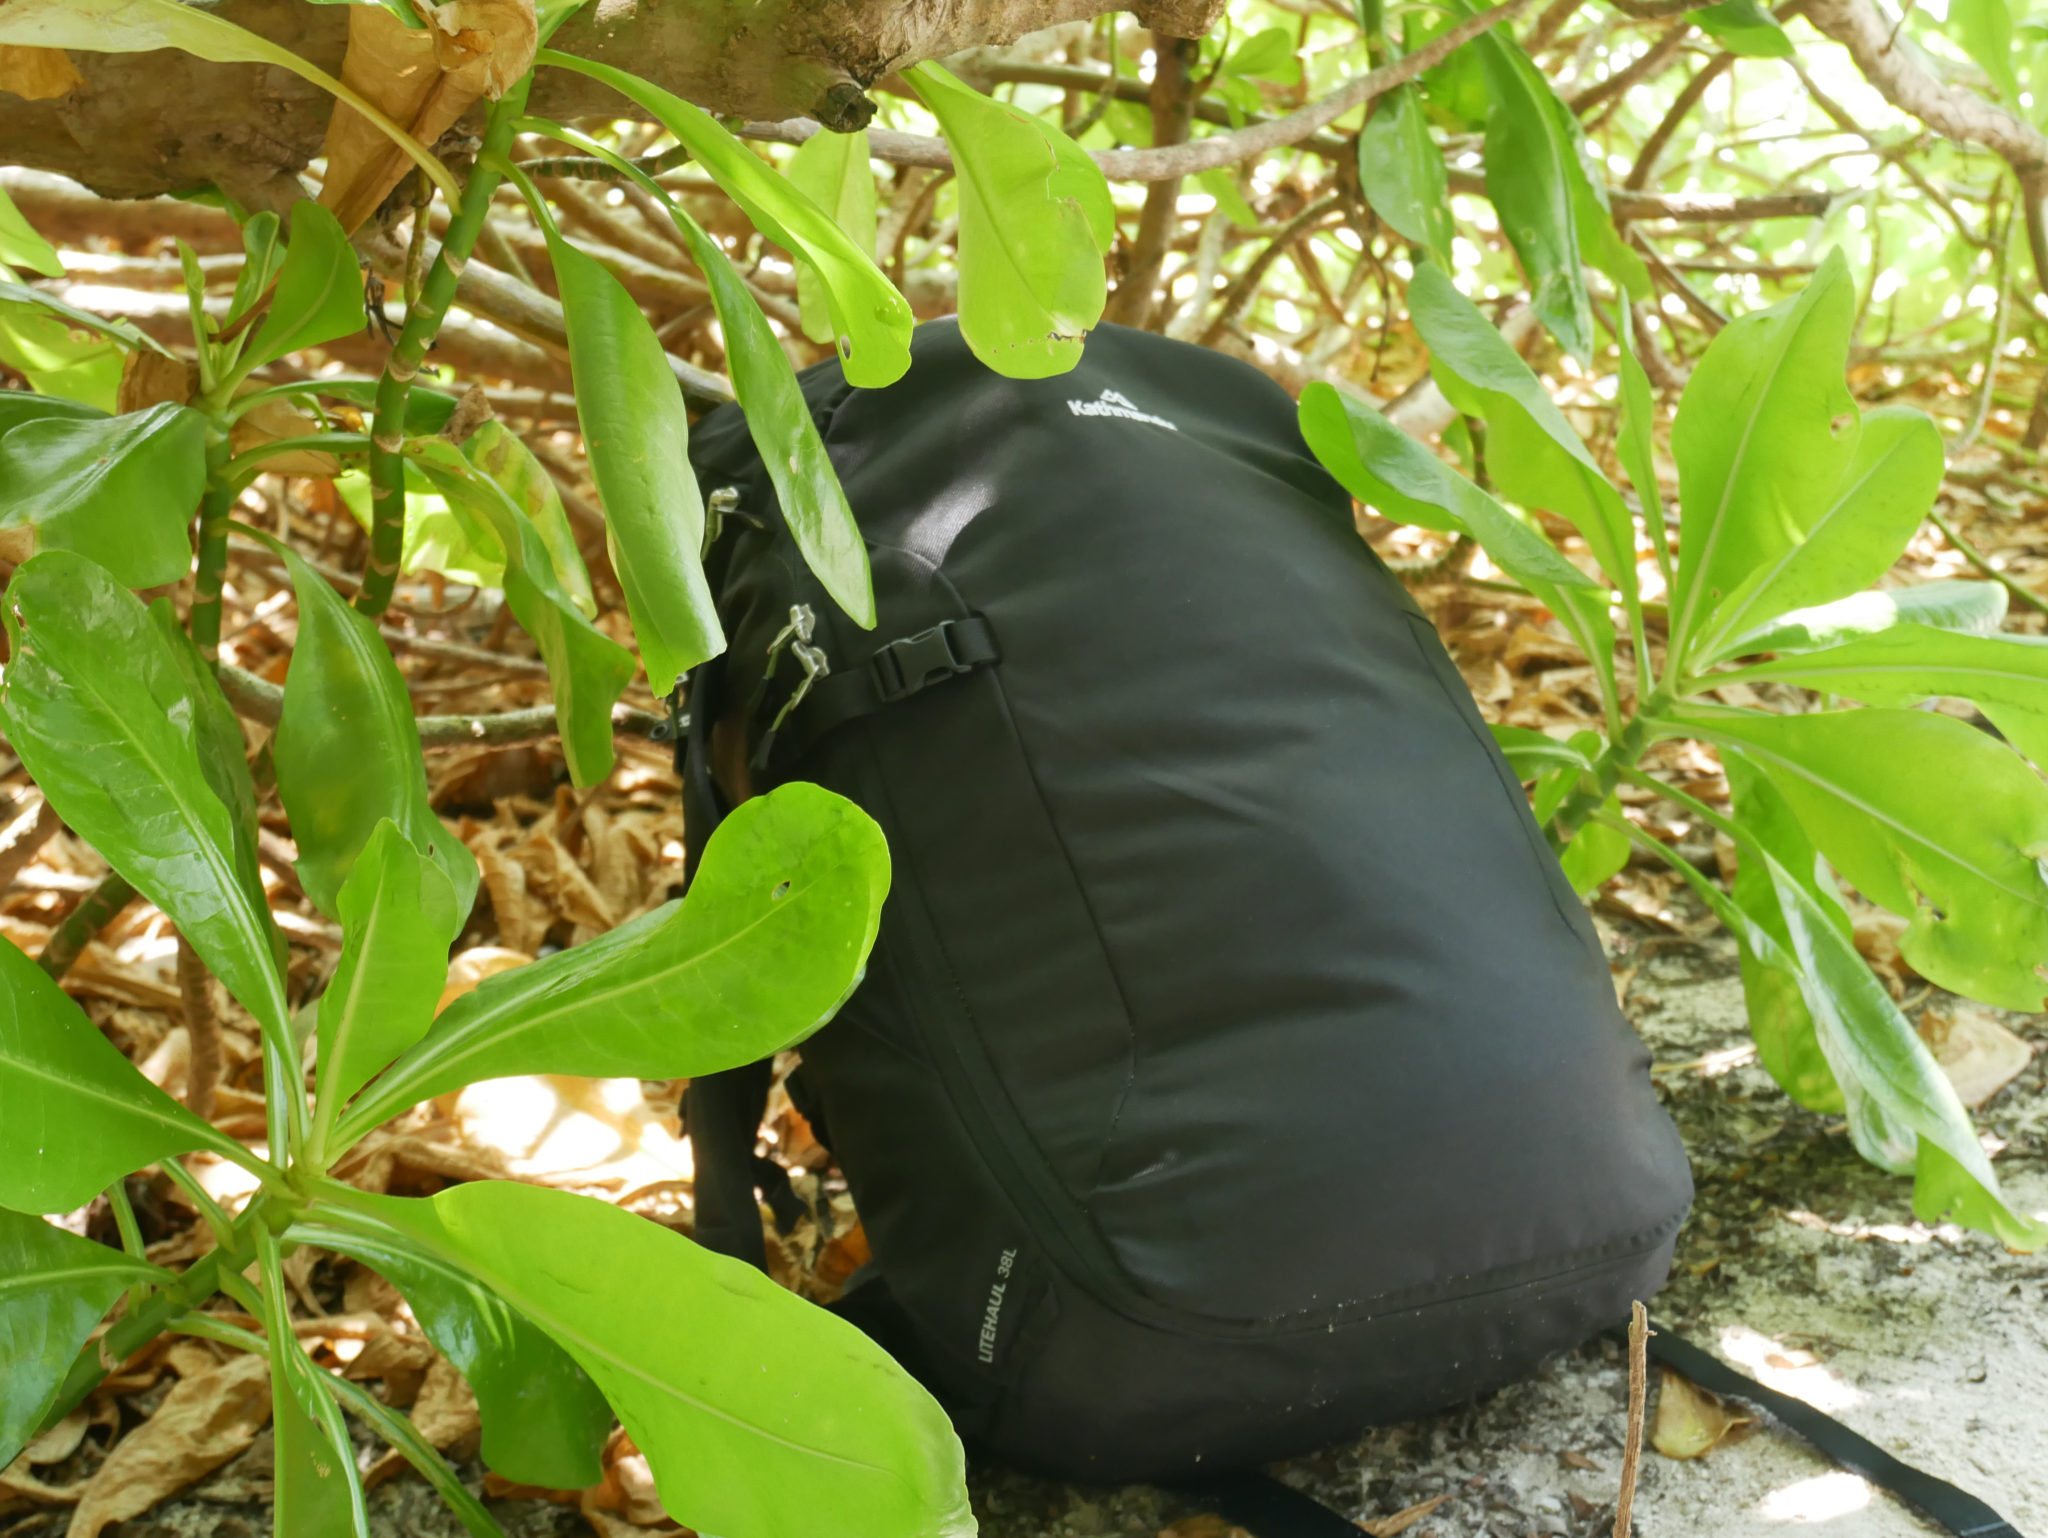 a black Kathmandu Litehaul 38L Backpack on the ground next to bushes in the Maldives